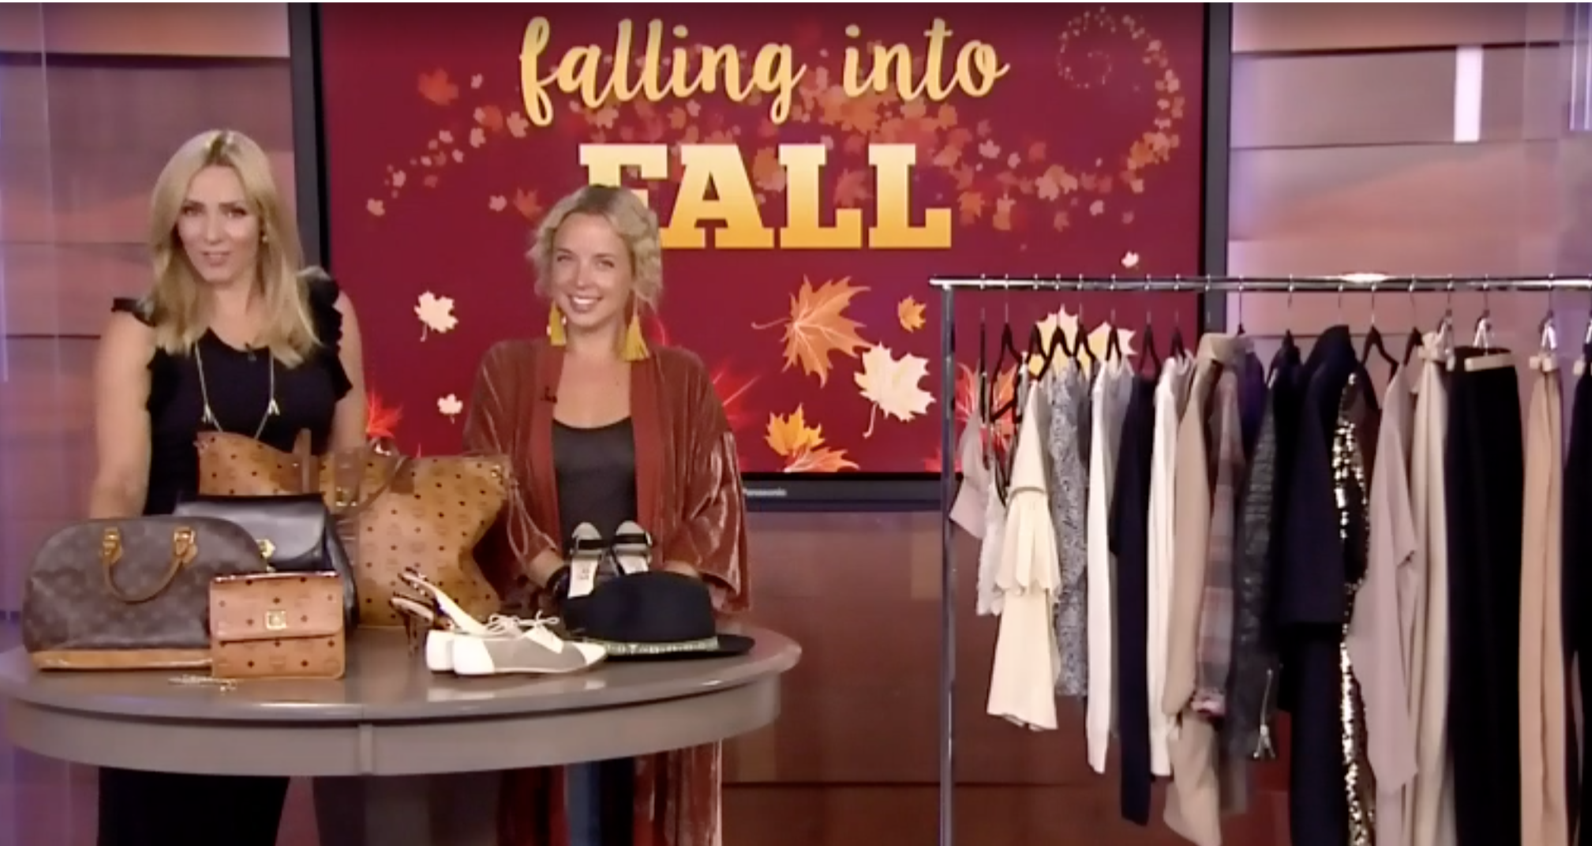 CTV Morning Live: My top tips for buying + selling consignment fashion